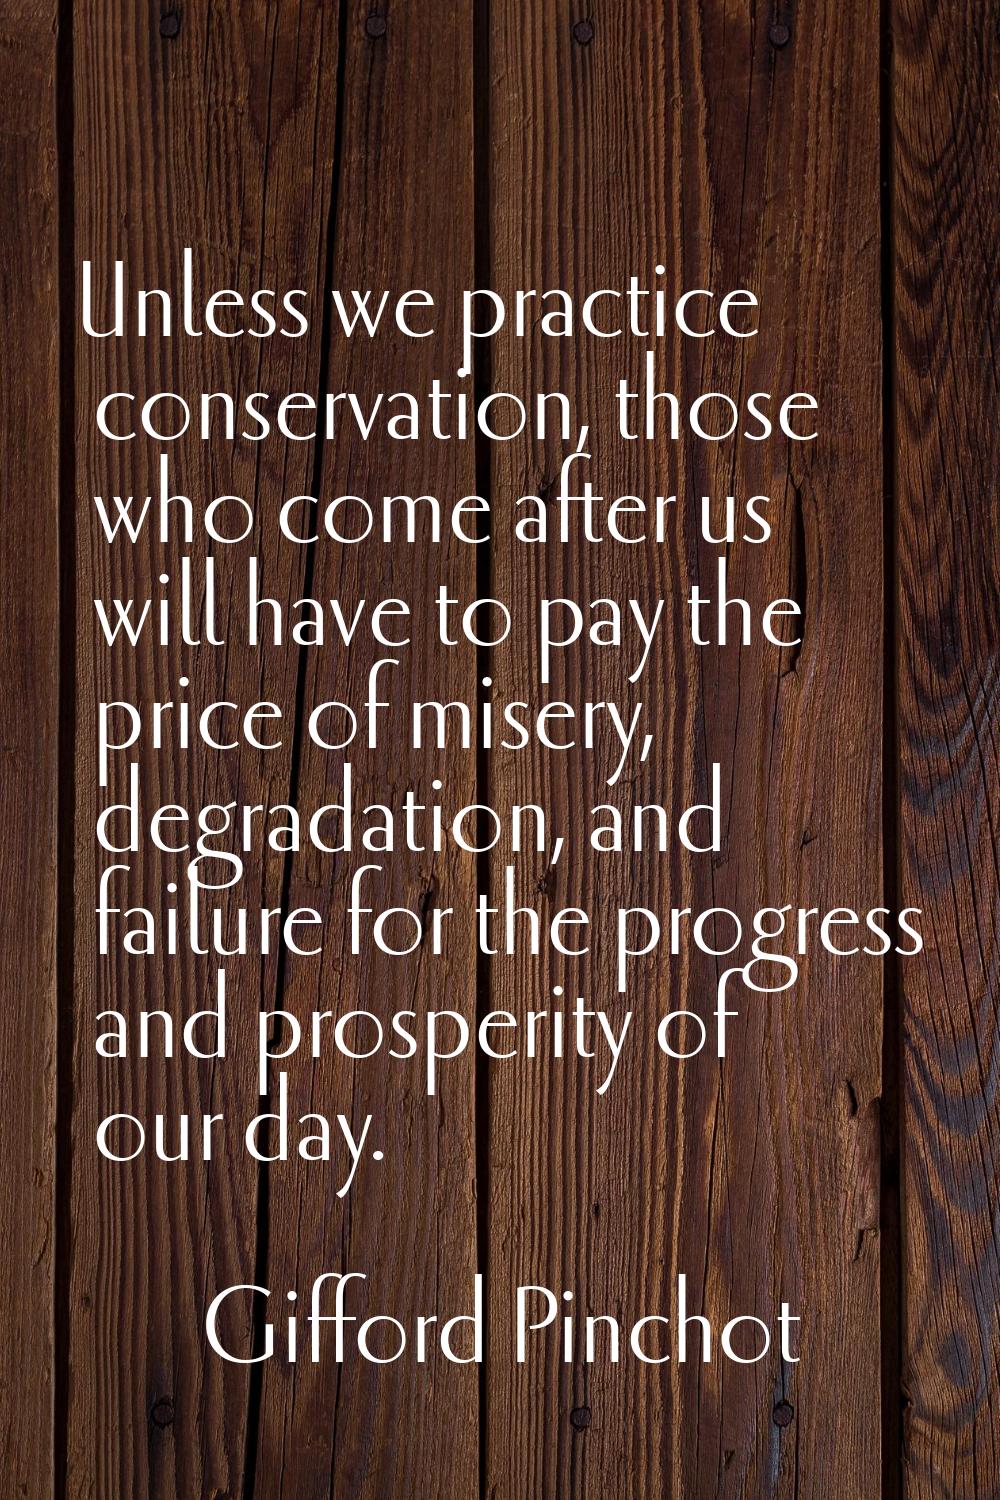 Unless we practice conservation, those who come after us will have to pay the price of misery, degr